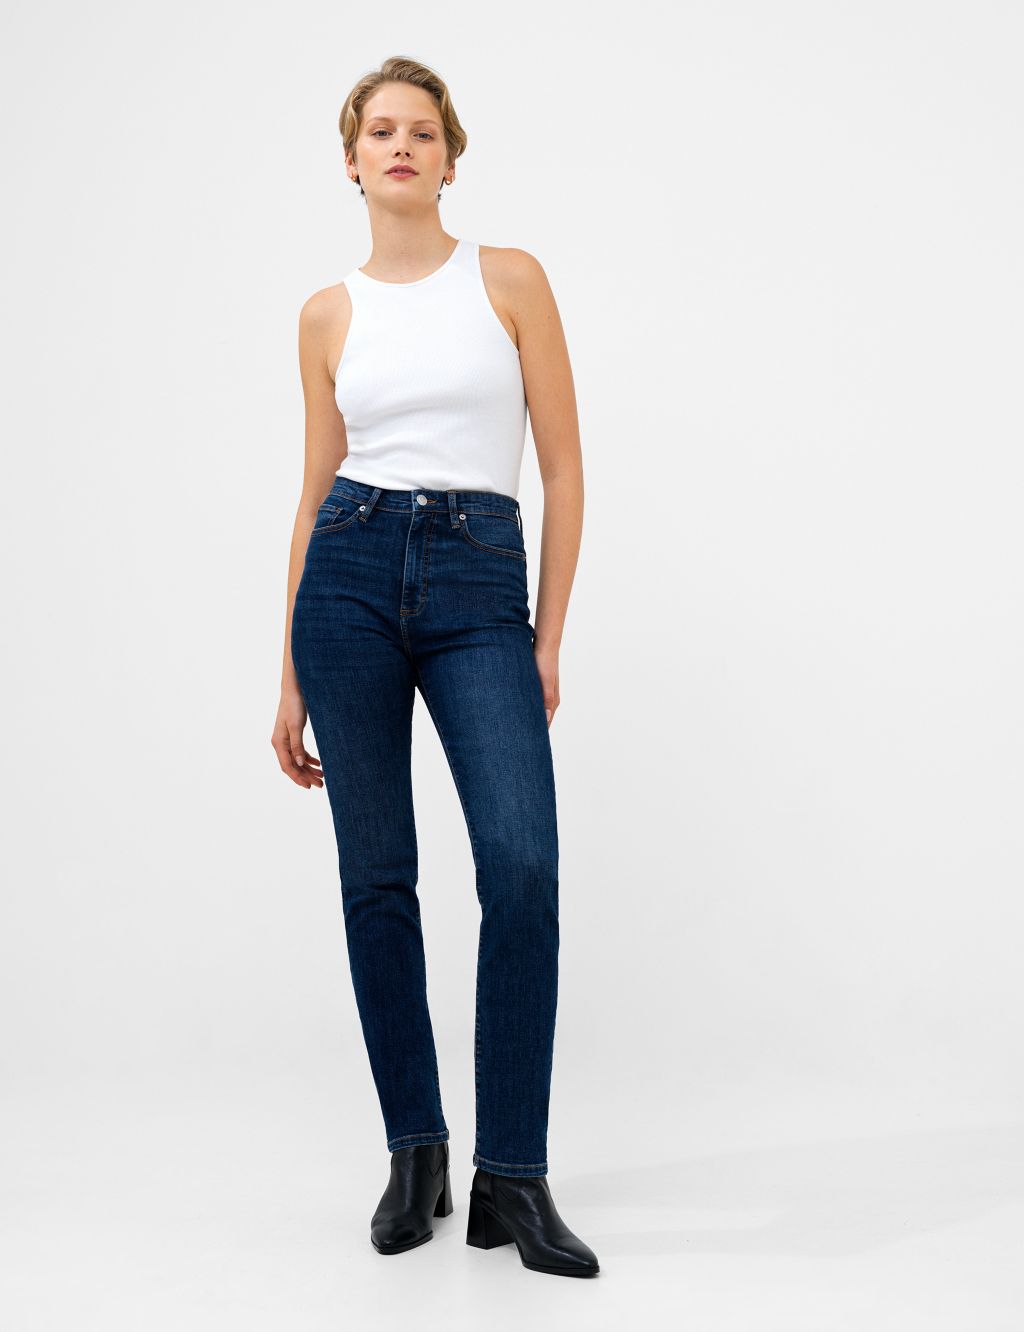 High Waisted Slim Fit Jeans